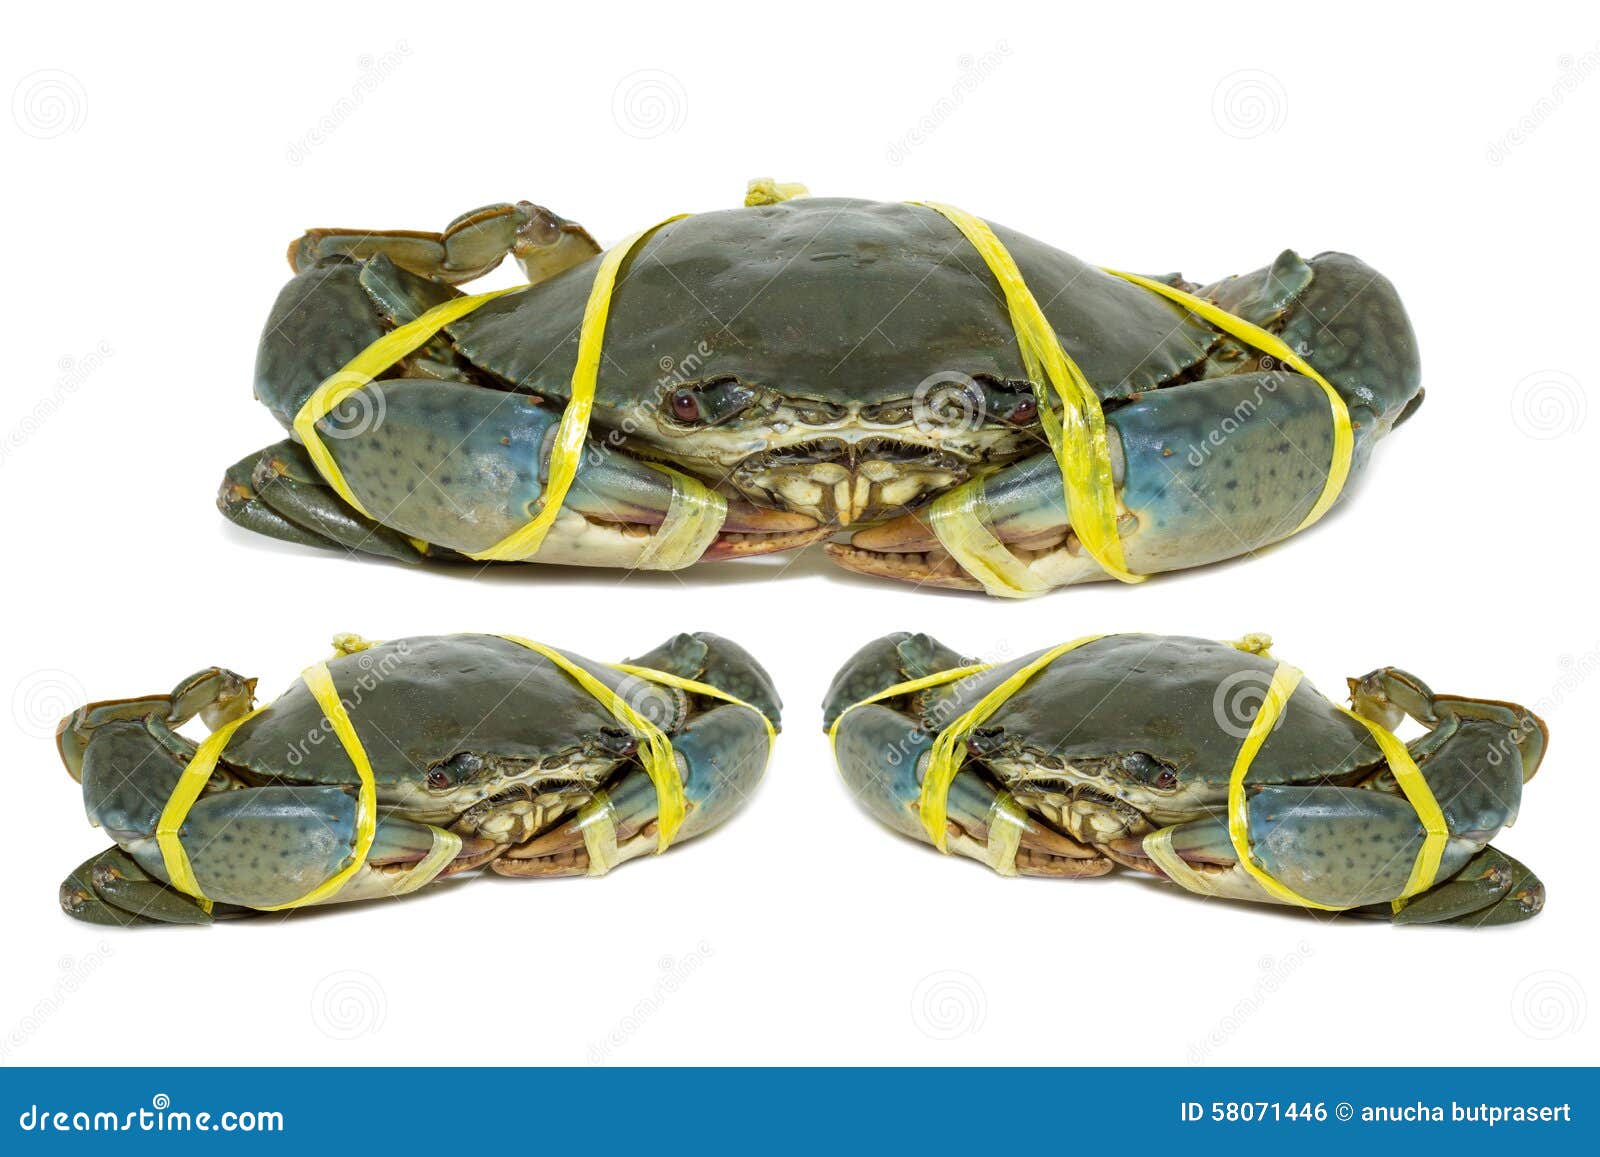 Raw Black Crab Tied with Rope Yellow on White Background. Stock